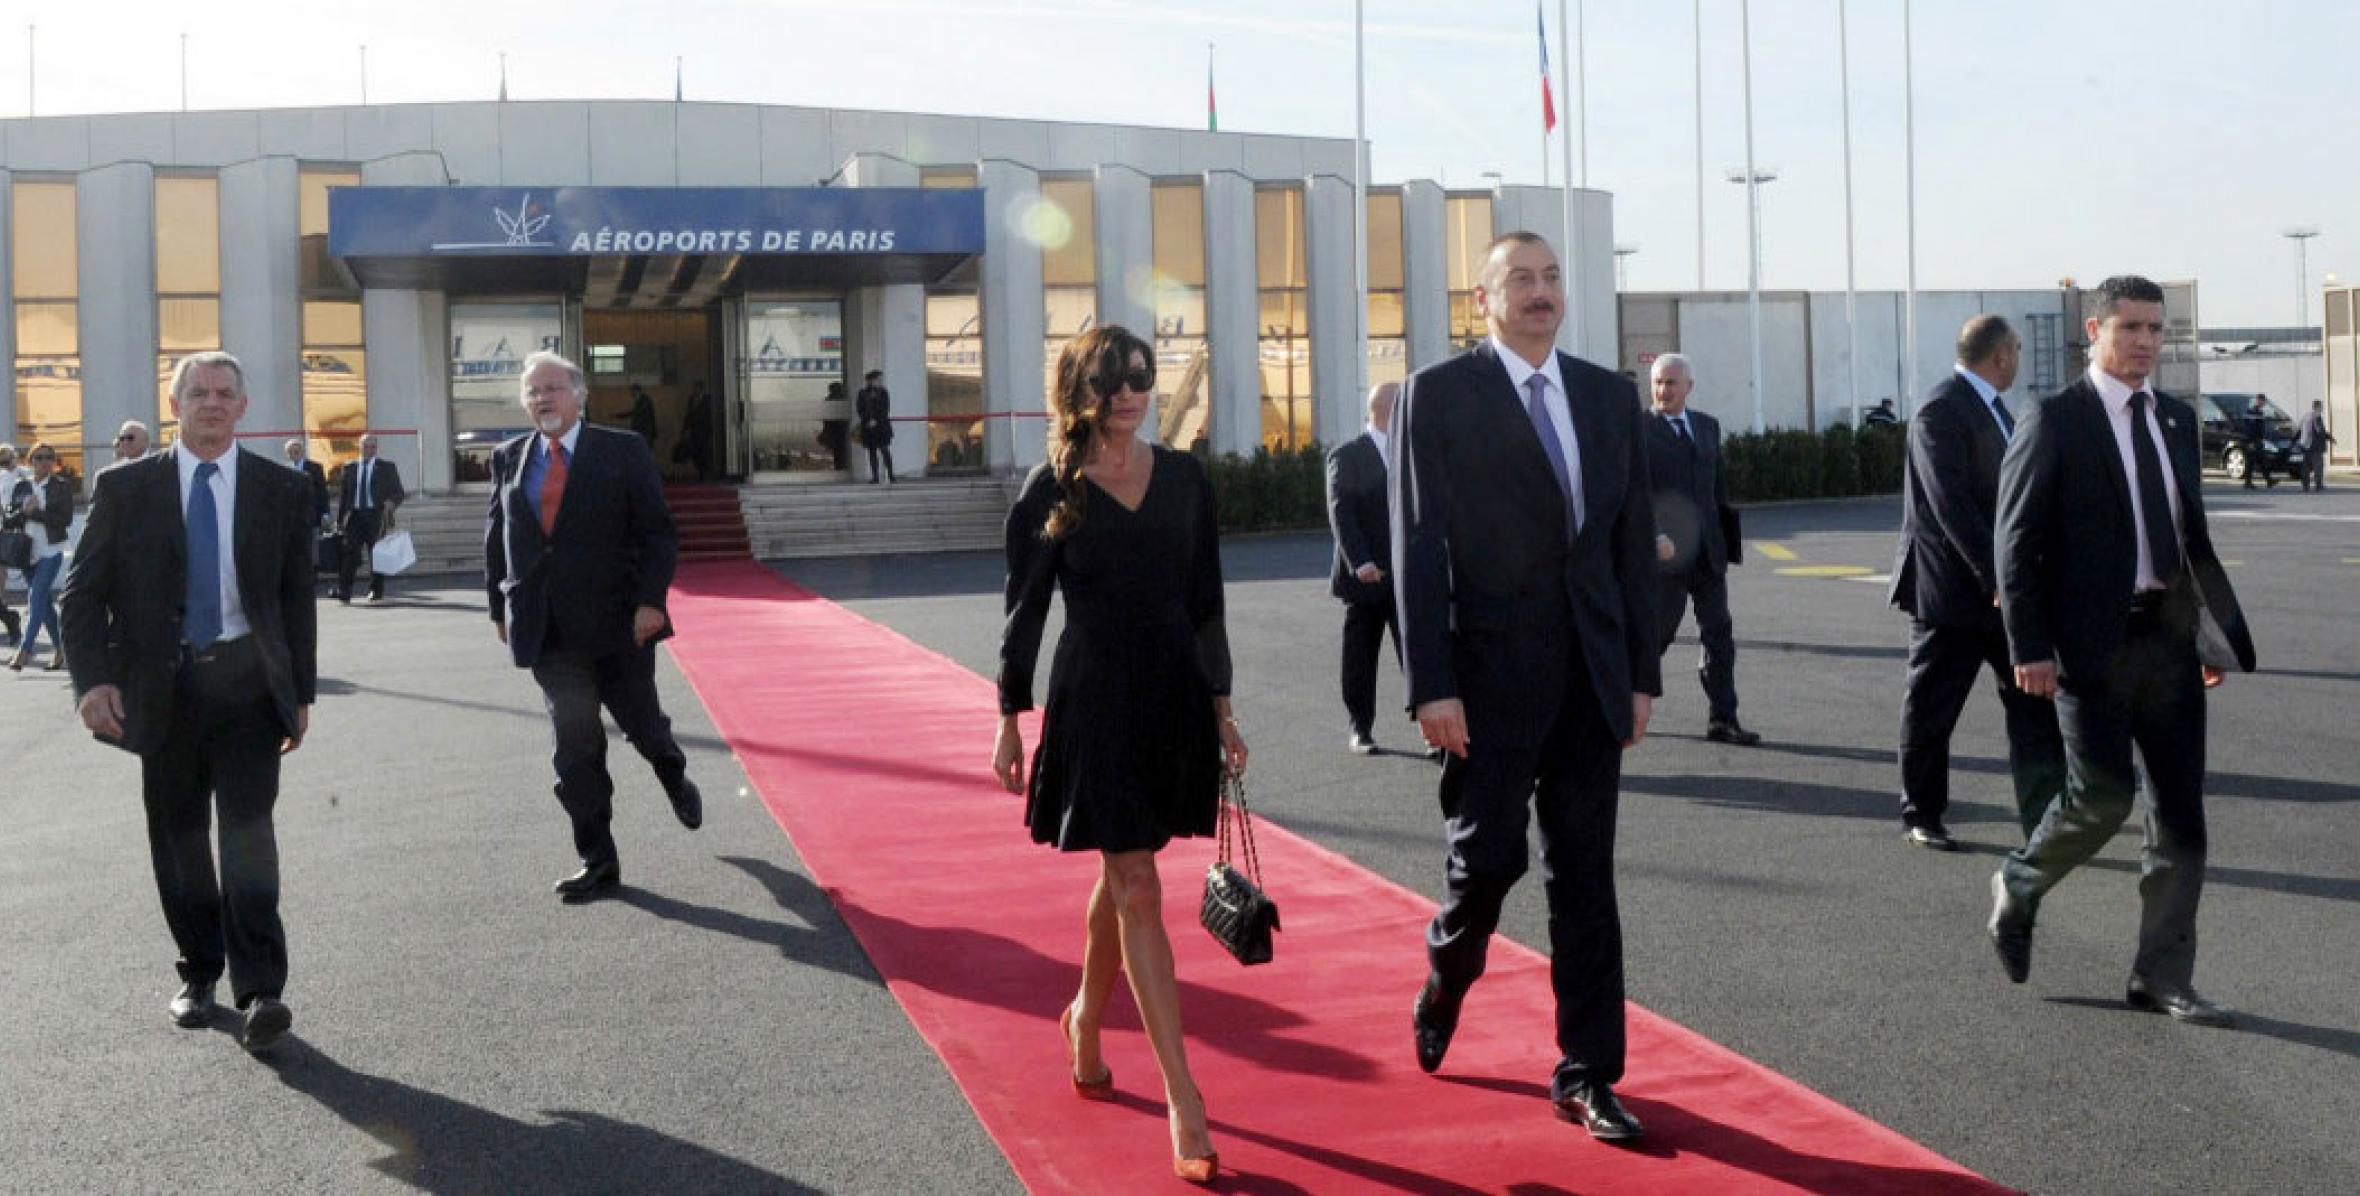 Ilham Aliyev returned to Baku after the end of working visit to the Republic of France